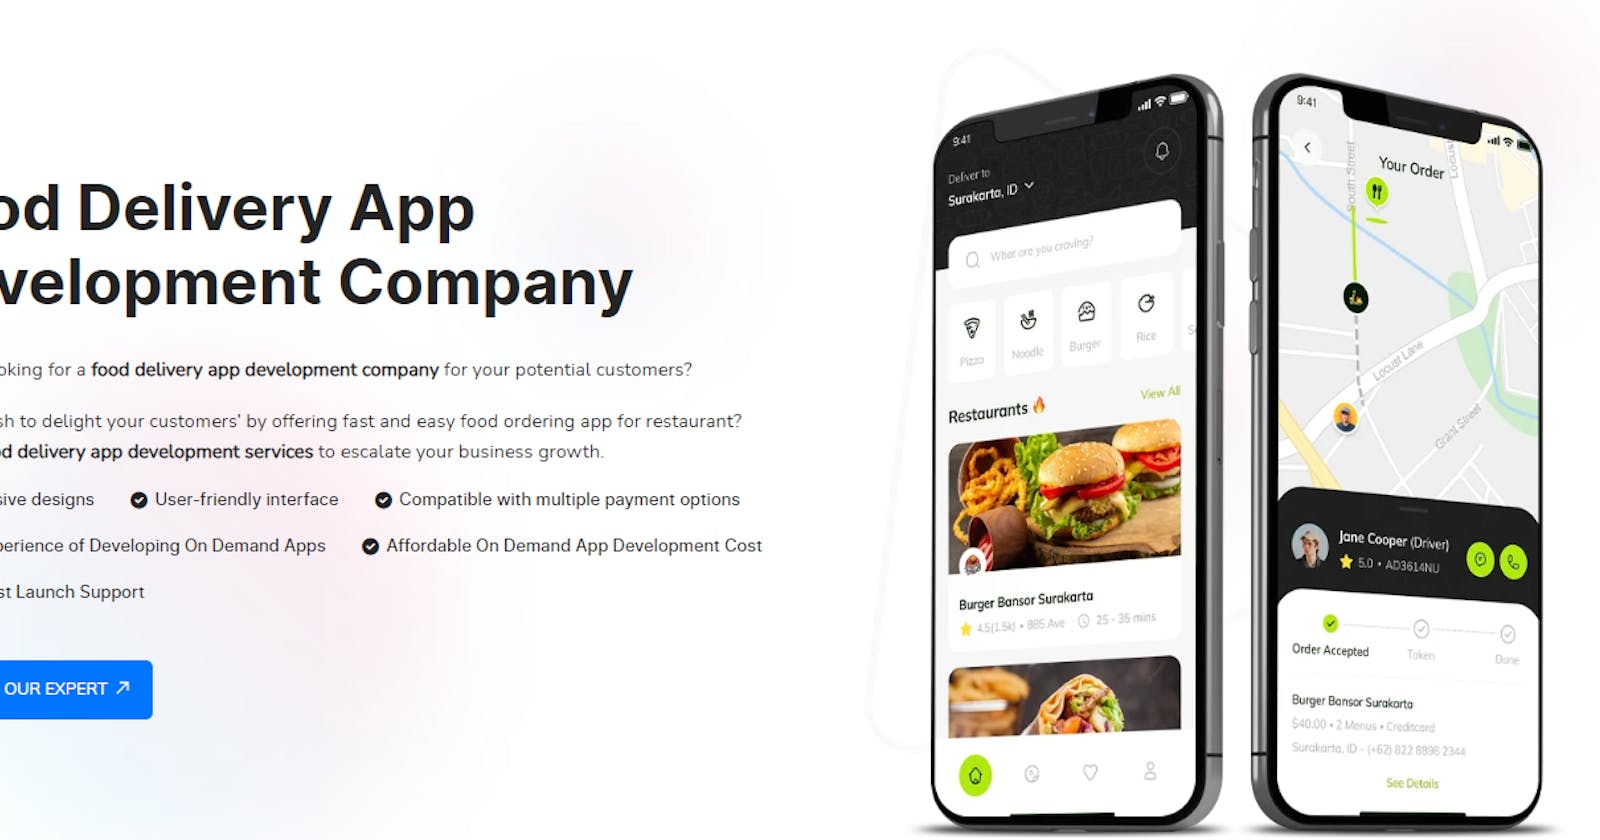 The Role of Artificial Intelligence in Food Delivery App Development